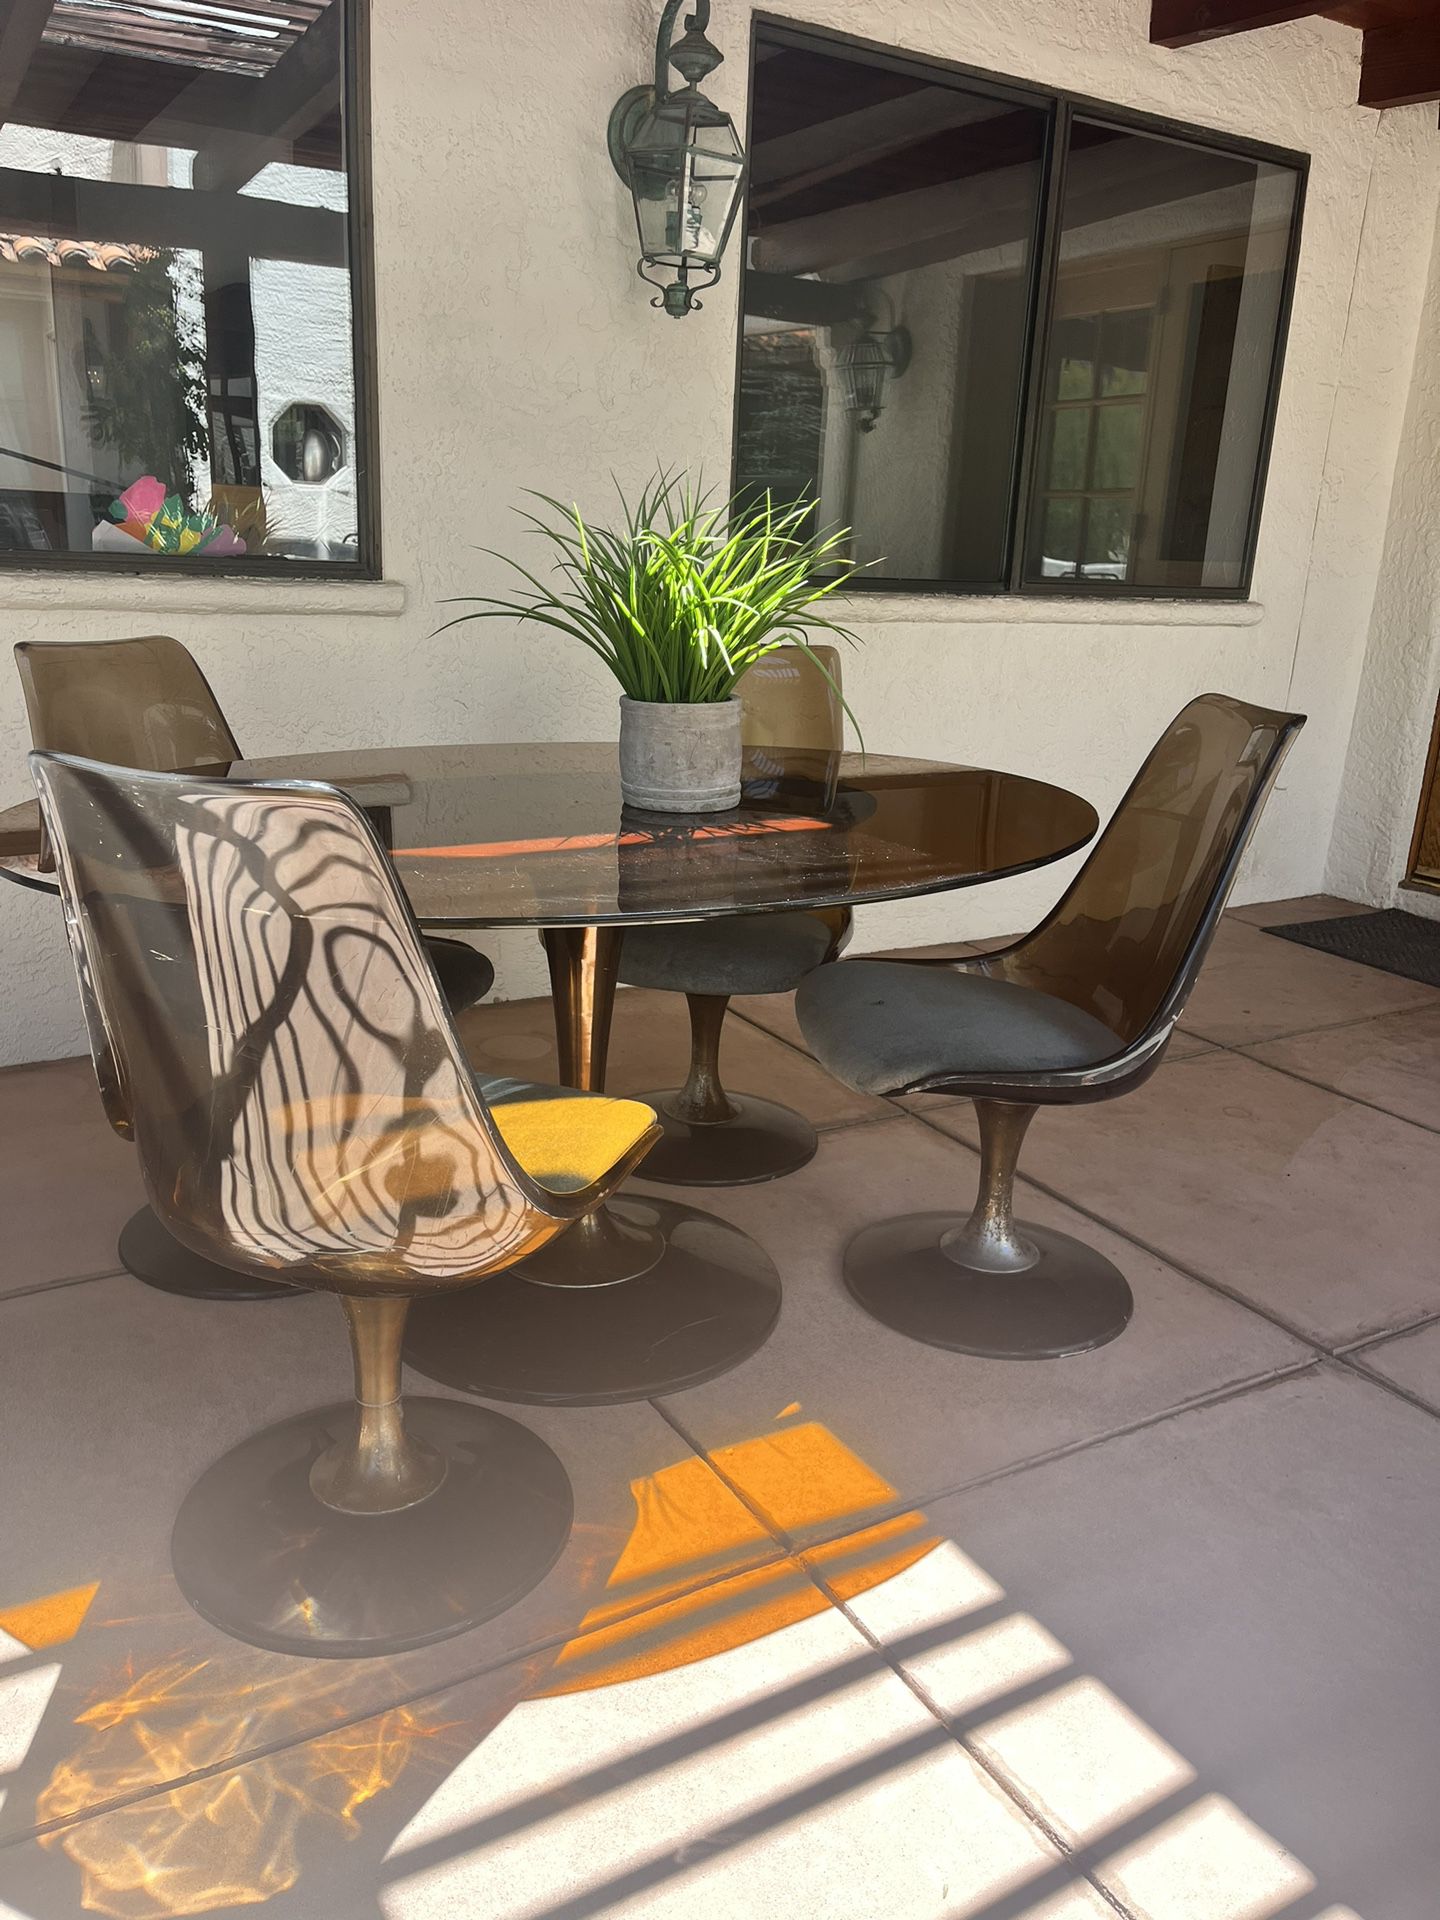 Stunning Mid-Century Modern Dining Set with Smoked Lucite and Glass Details